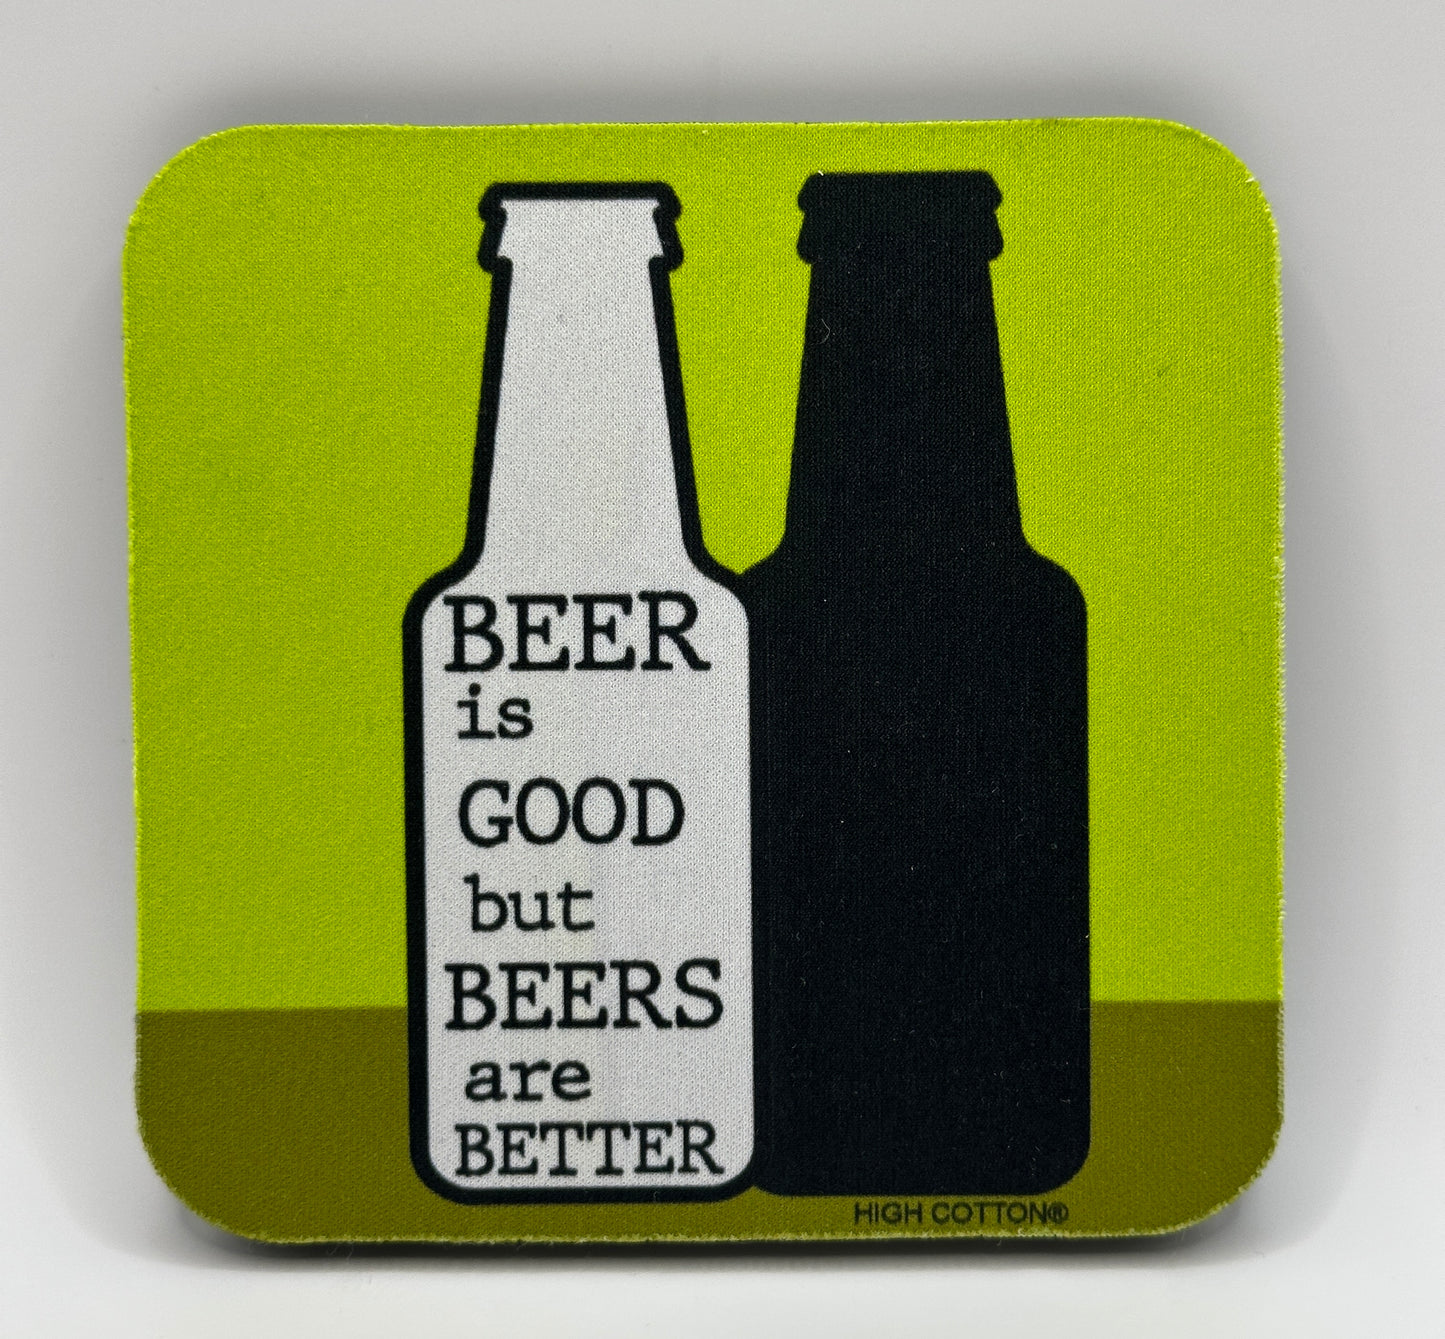 Beer Is Good But Beers Are Better Coaster